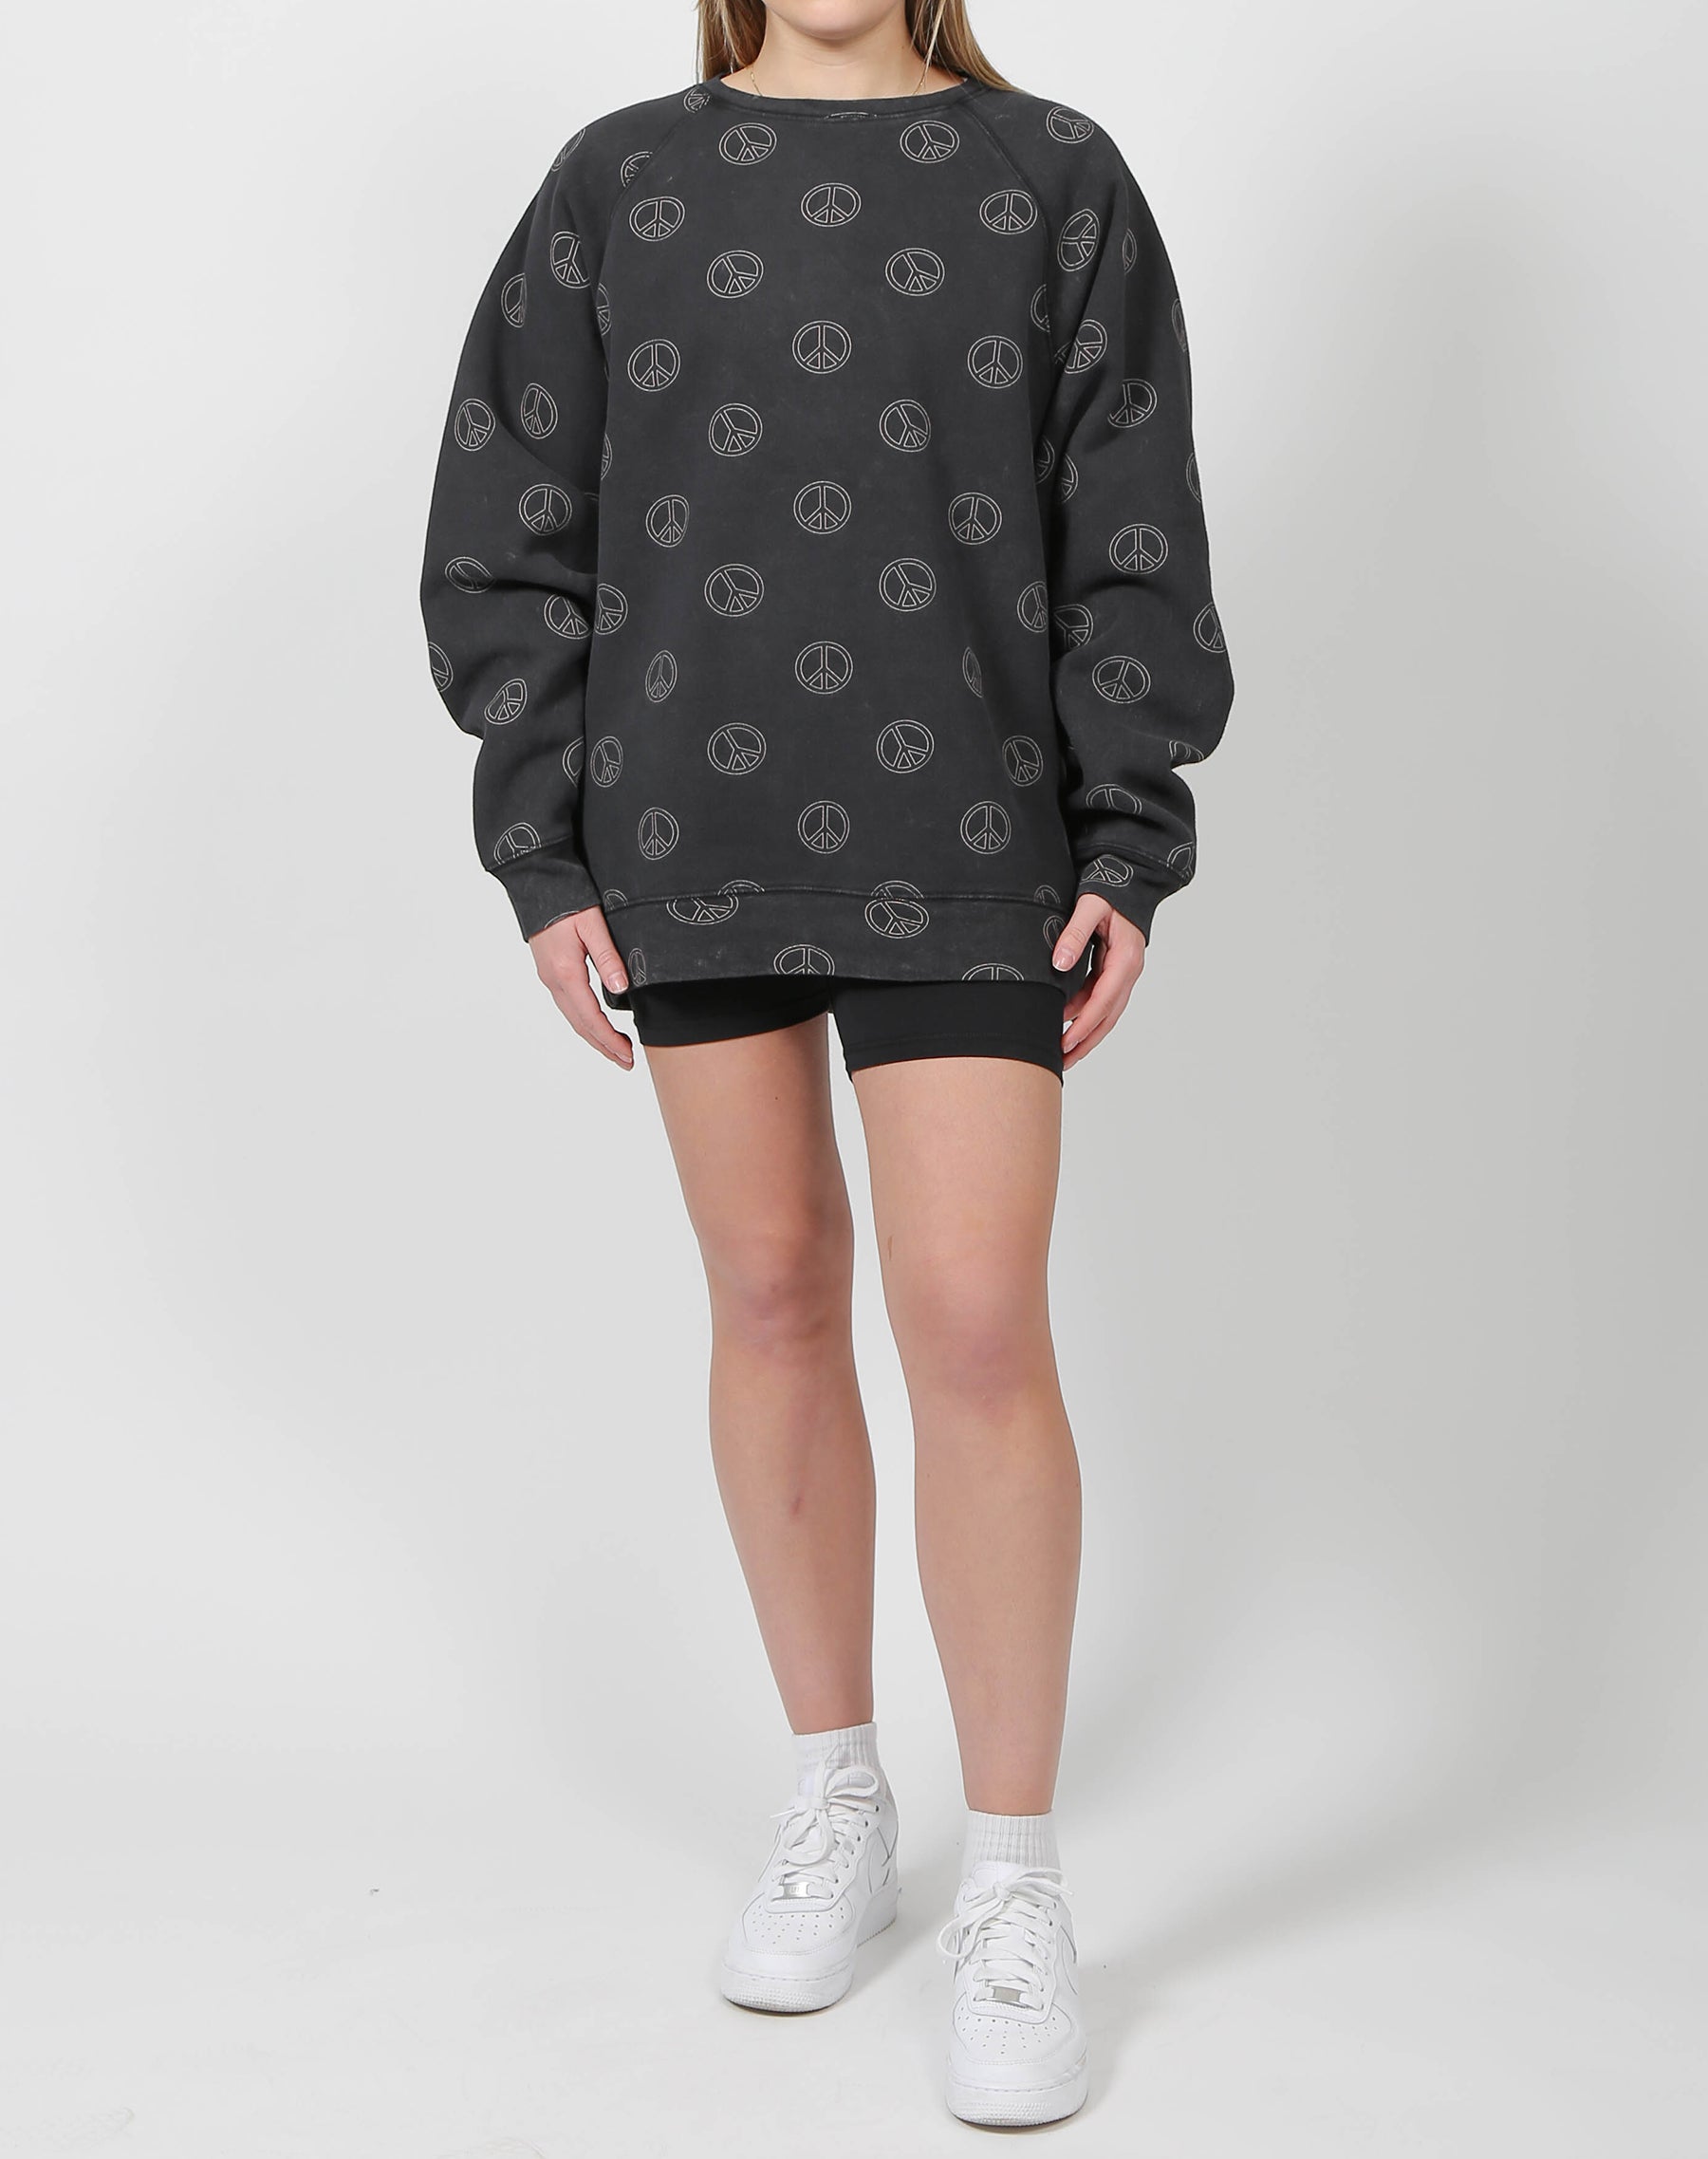 The "PEACE SIGN" Not Your Boyfriend's Crew Neck Sweatshirt | Washed Black